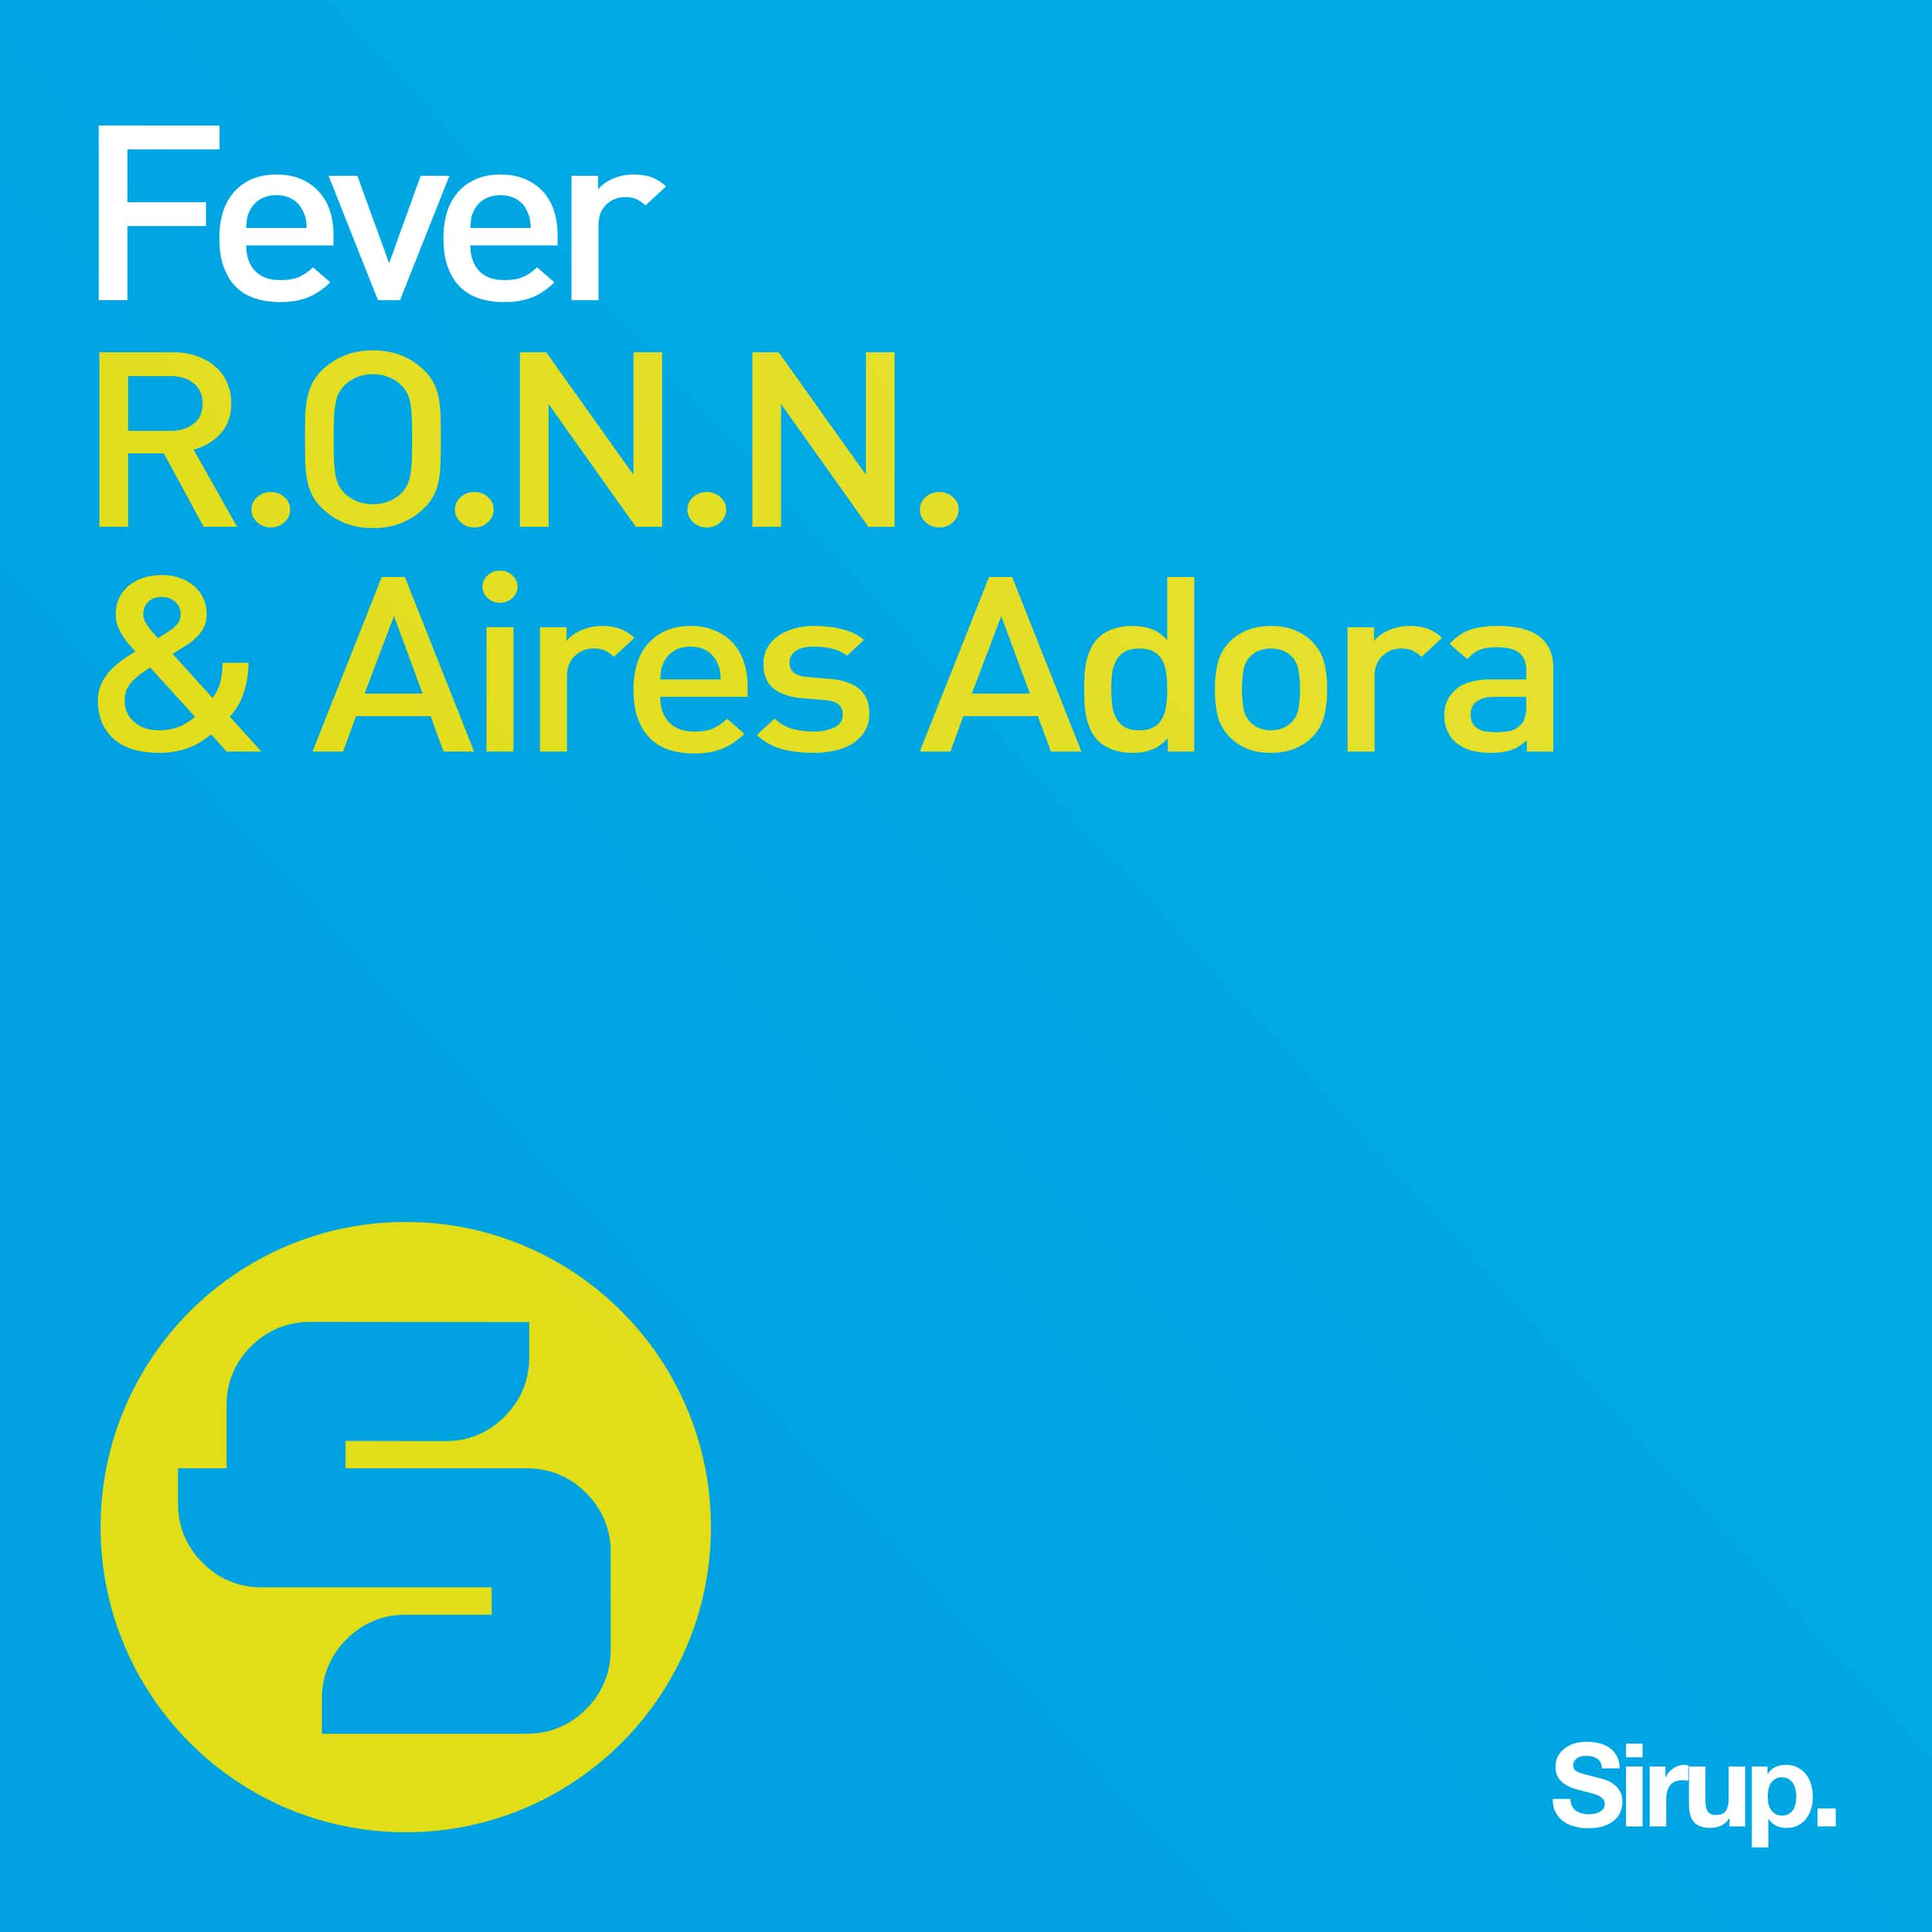 R.O.N.N & Aires Adora Release ‘Fever’